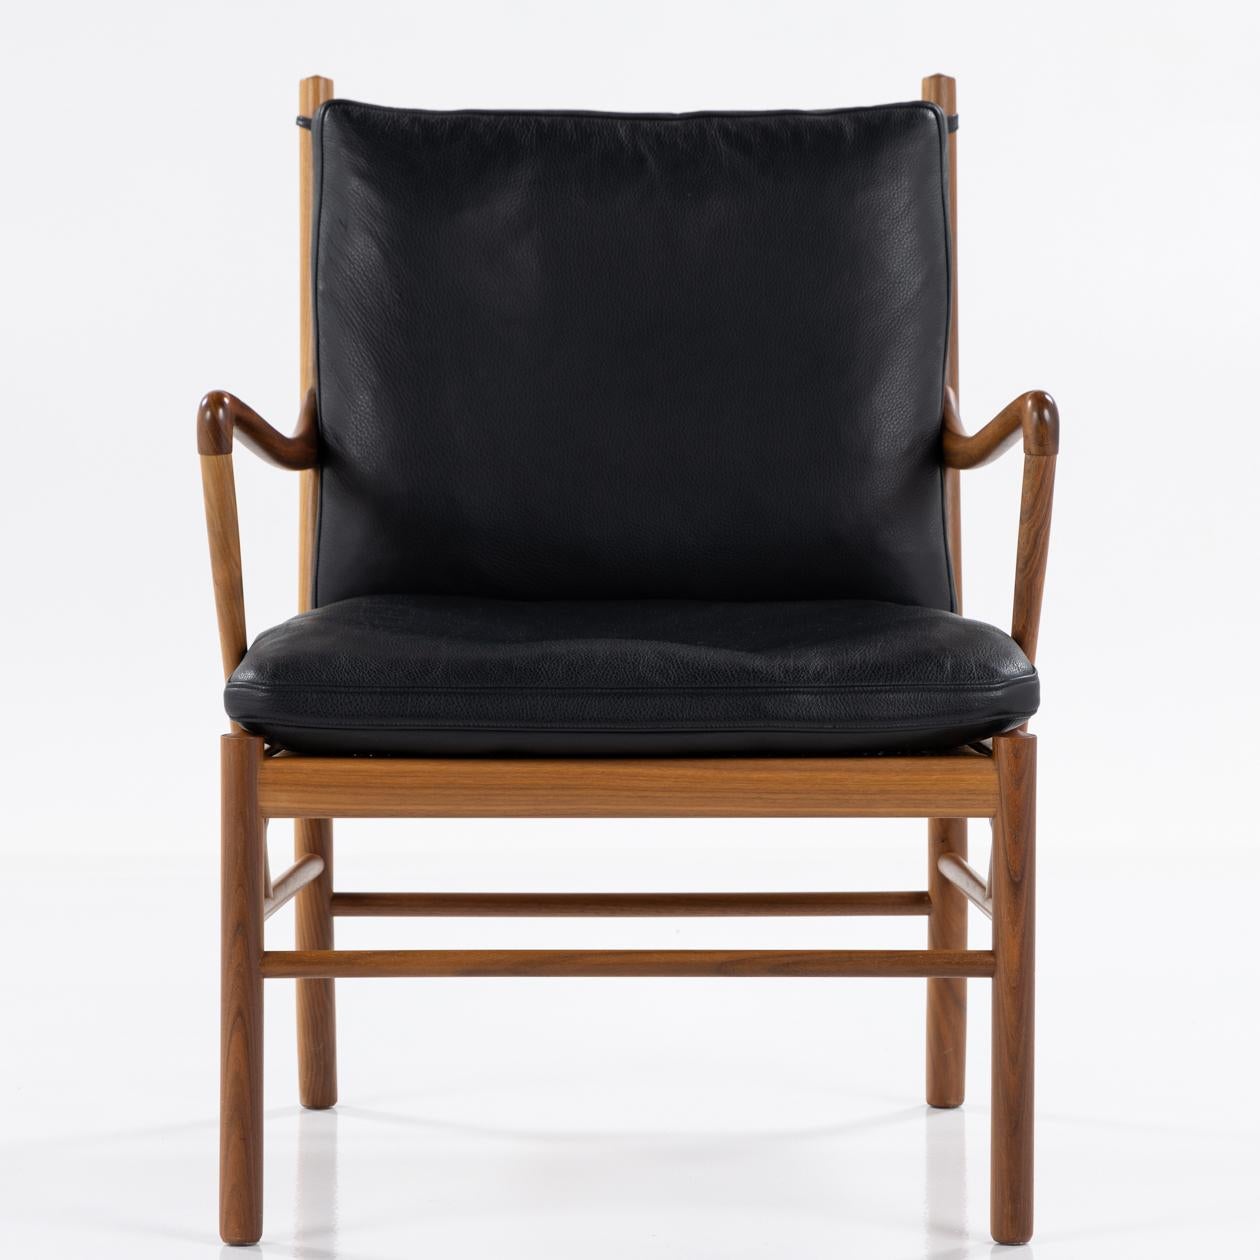 PJ 149 - 'Colonial chair' in black leather and walnut by Ole Wanscher For Sale 2